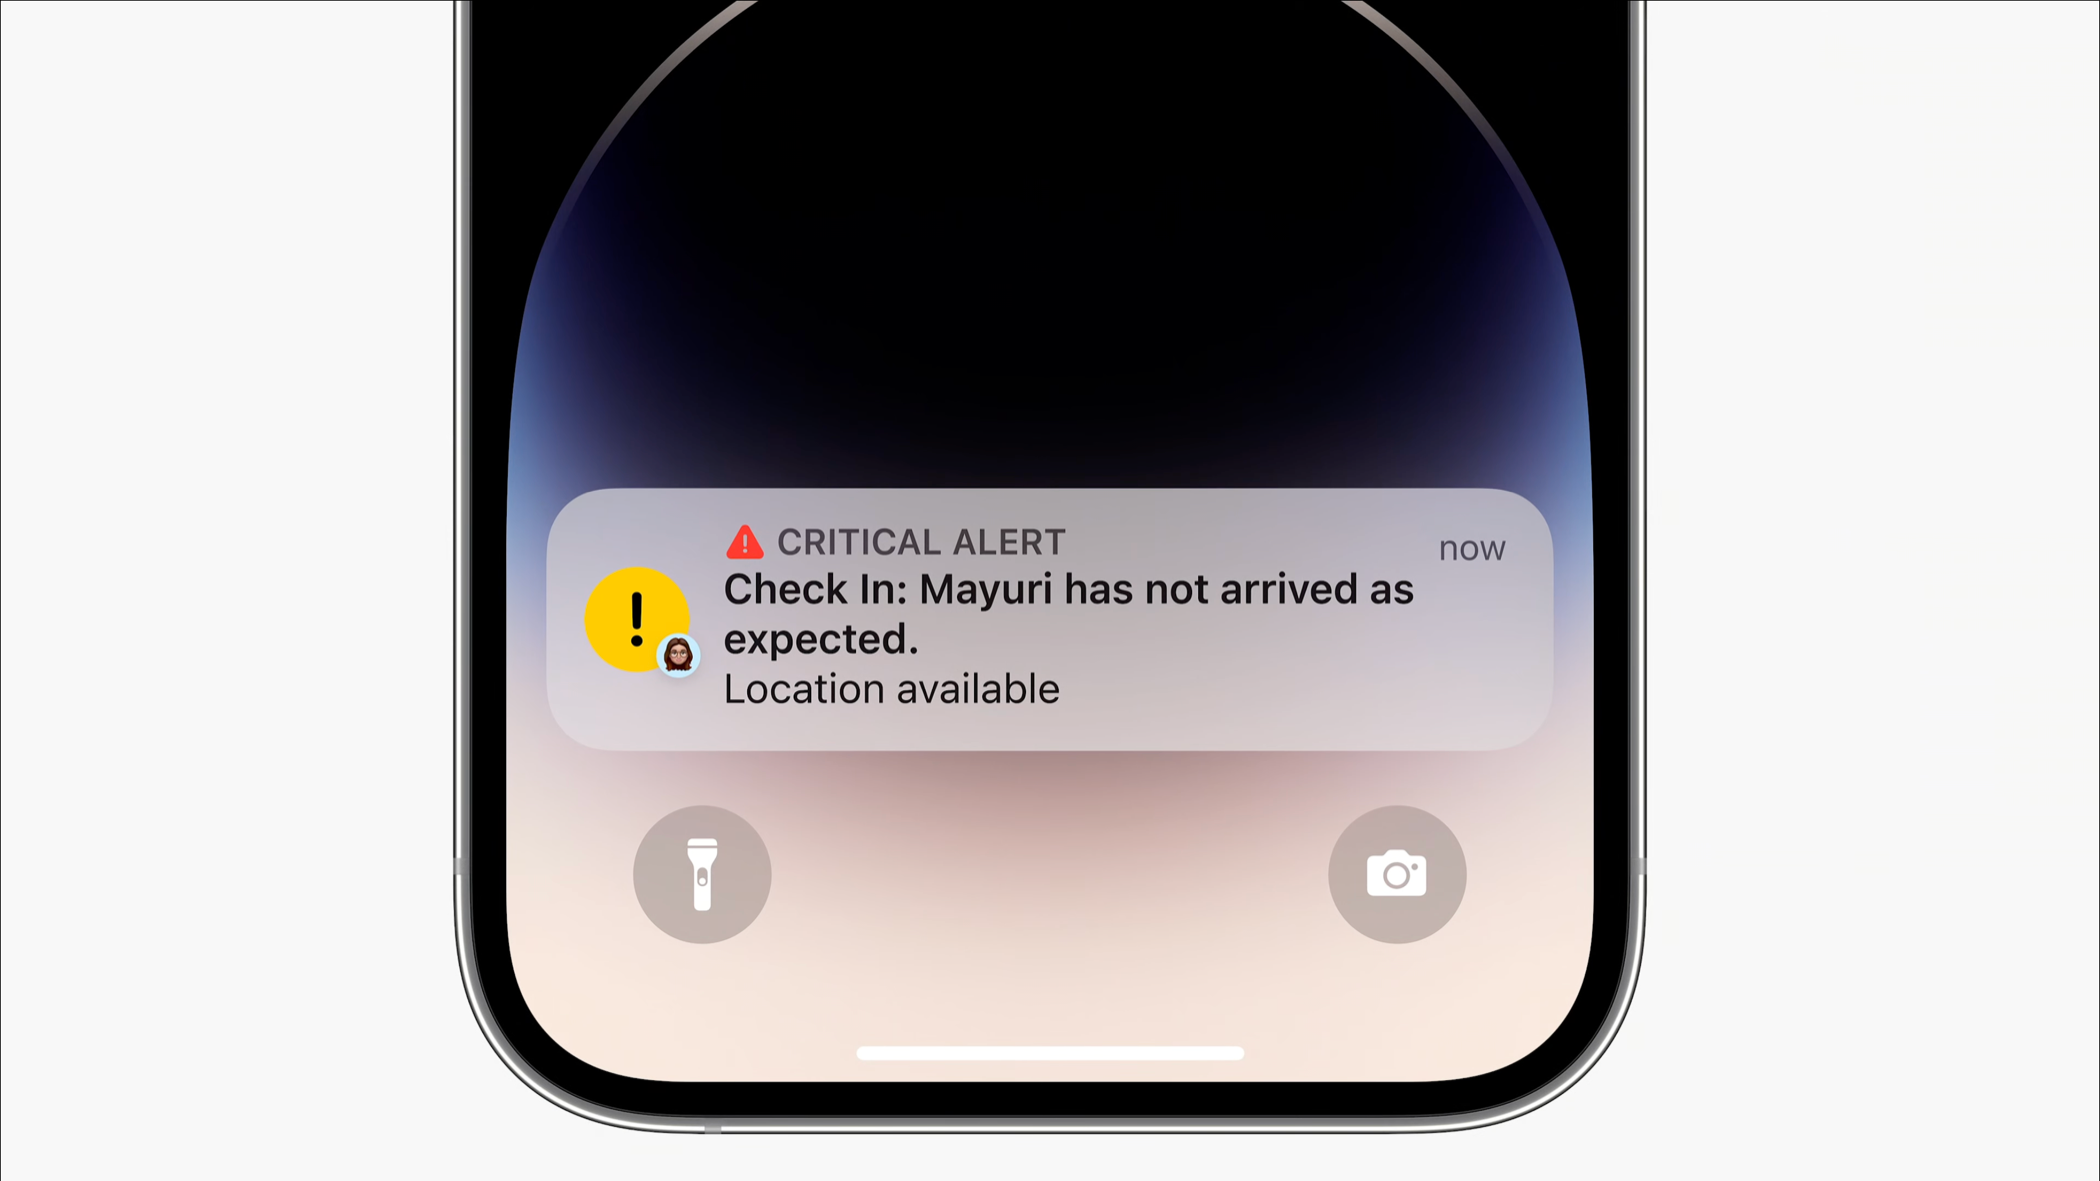 #How to Use Check In on iPhone to Let People Know You’ve Arrived Safely